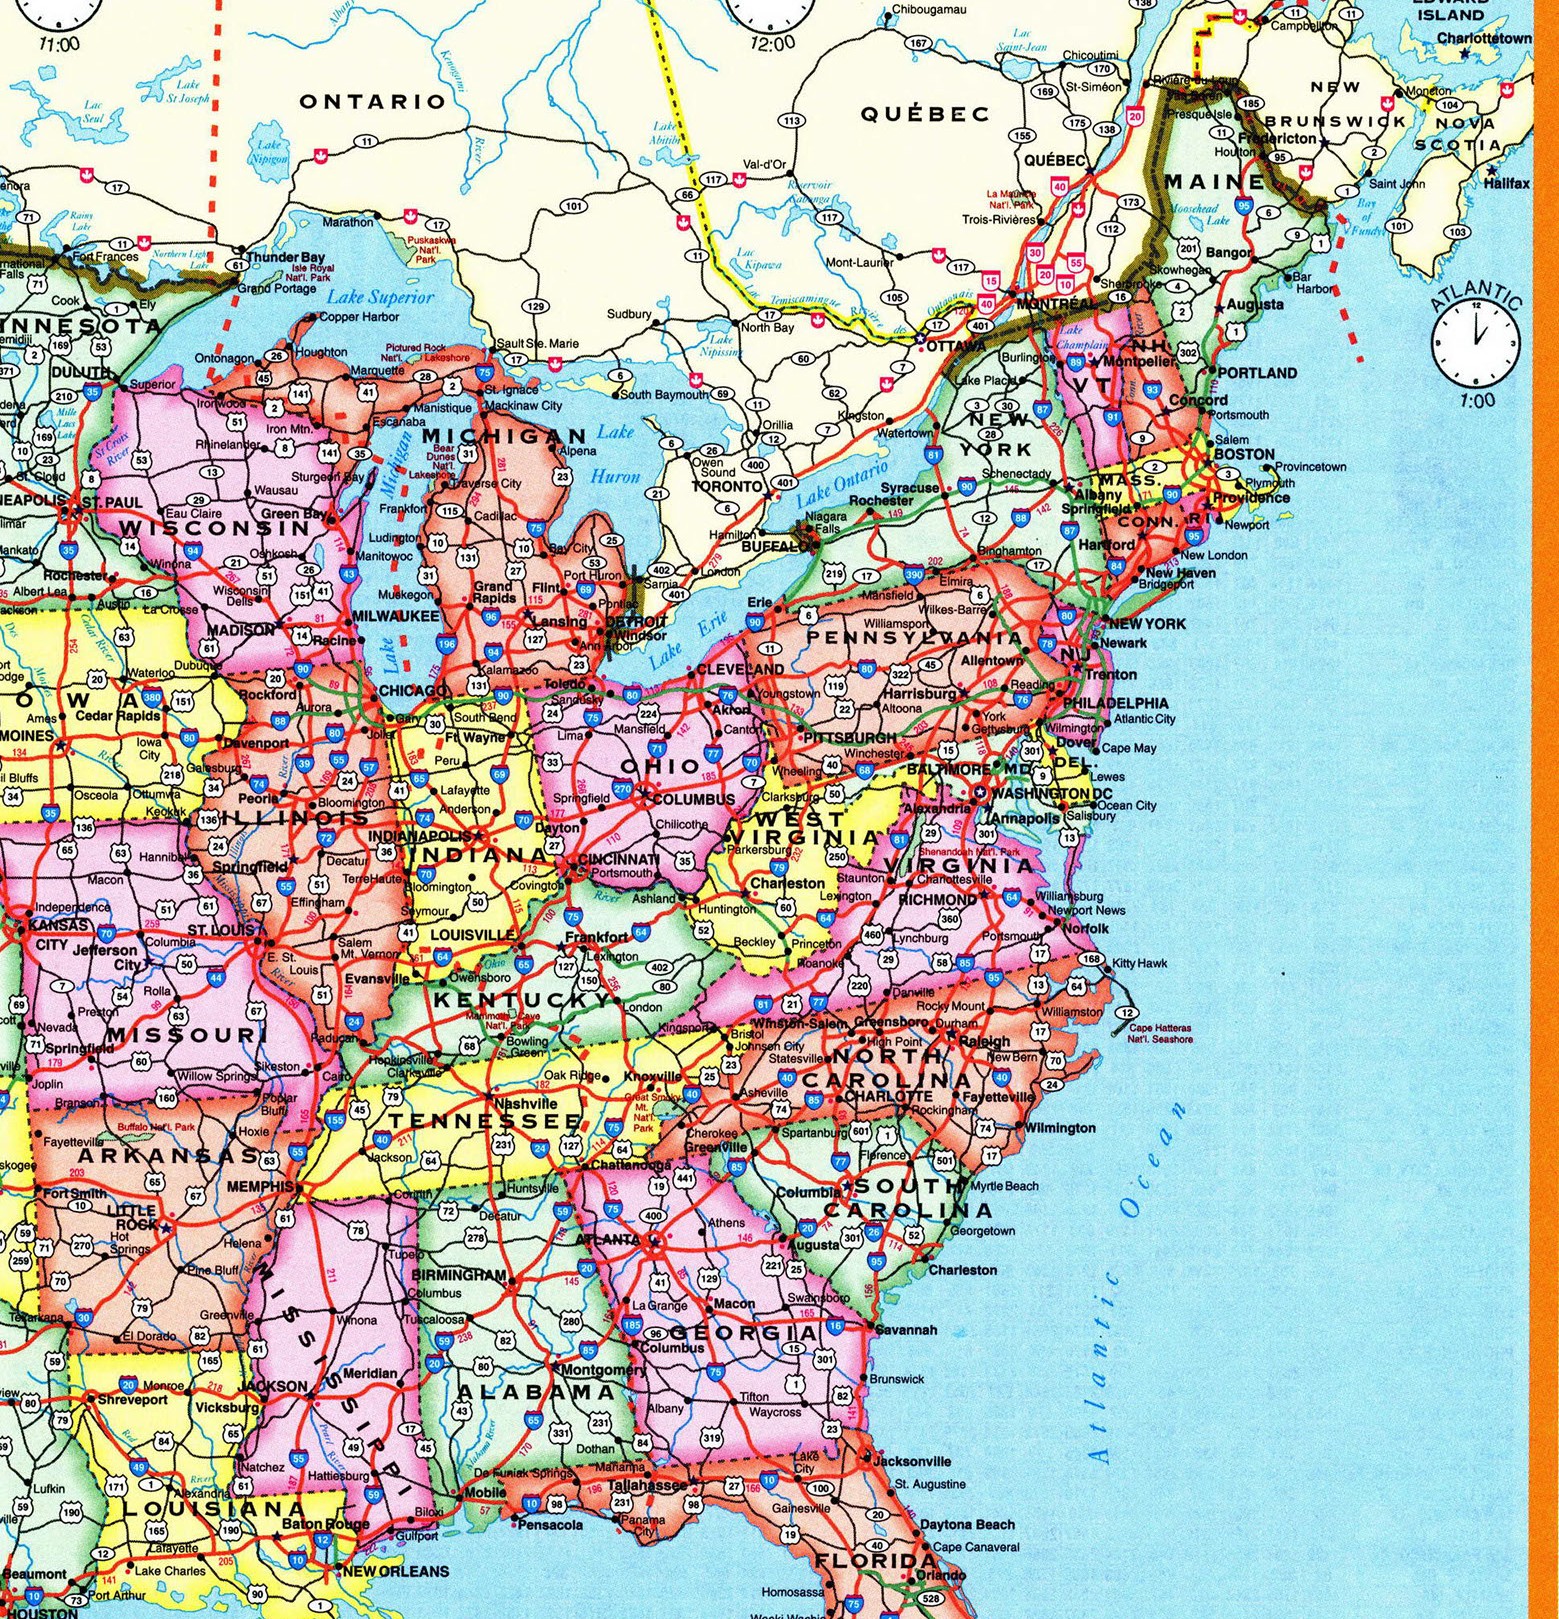 Detailed map of Time Zones of east half of USA